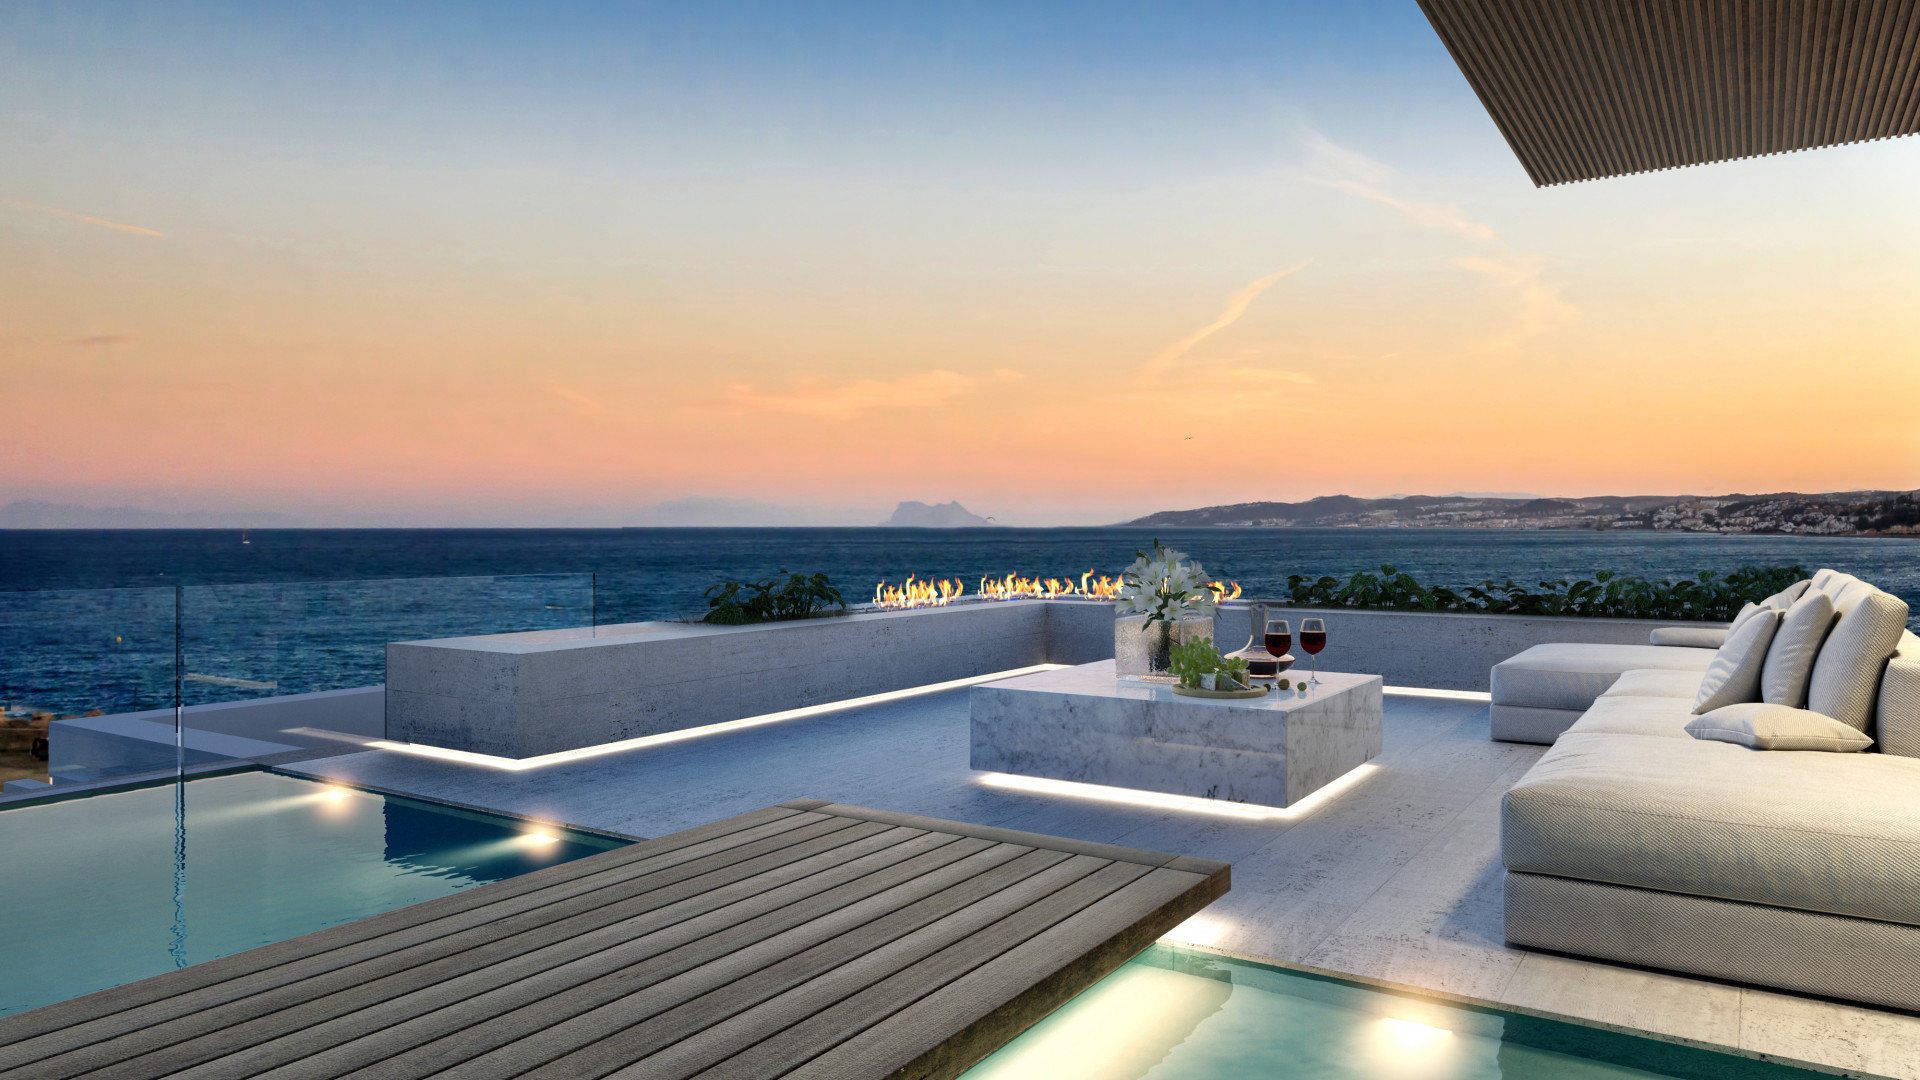 Ikkil Bay: Luxury residential project of nine homes with ocean views in Estepona. | Image 1